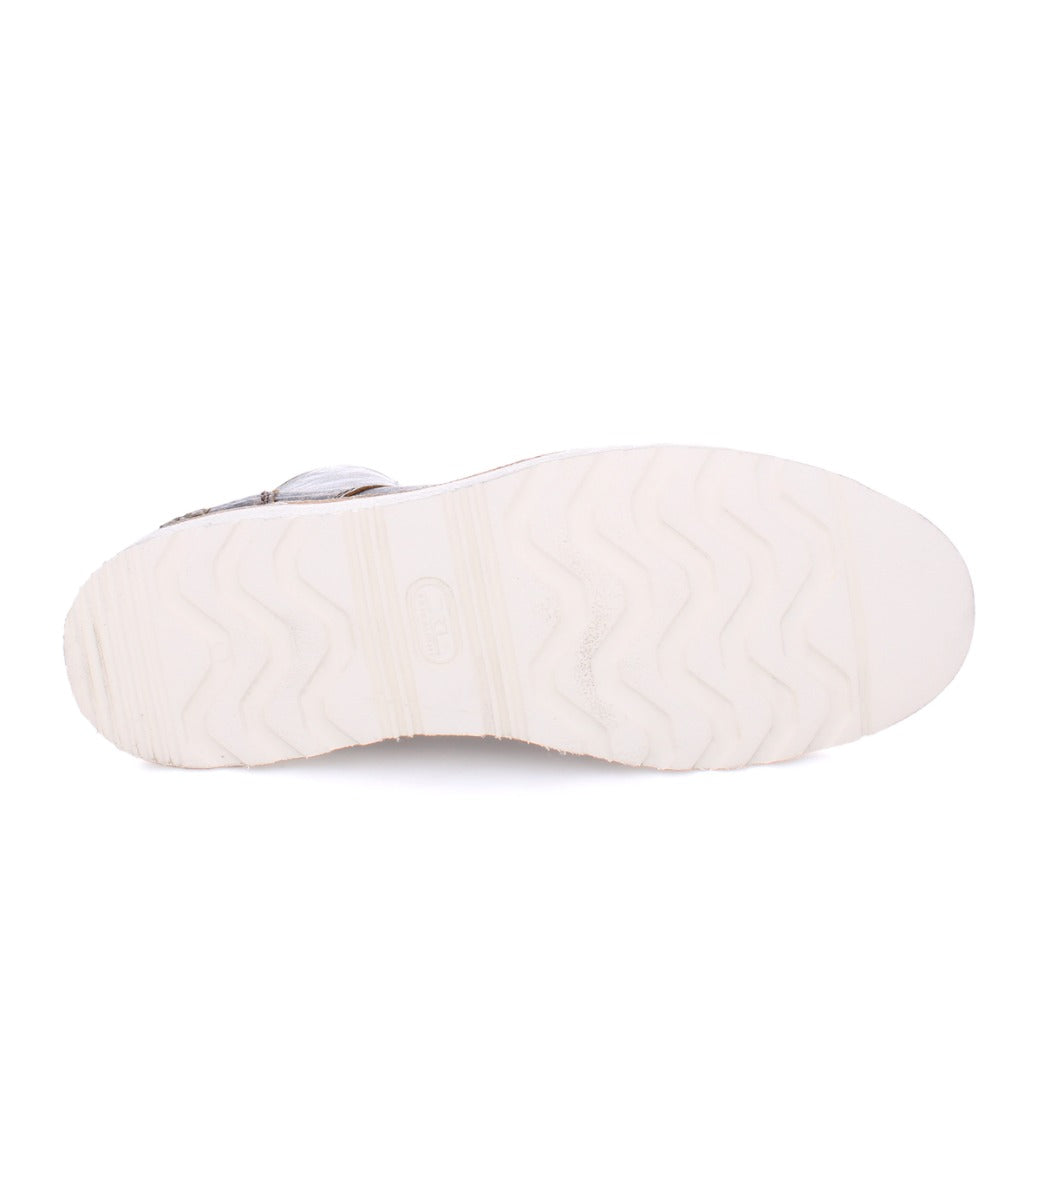 Bottom view of a Protege Light shoe by Bed Stu featuring a white sole with wave-patterned tread and a small logo imprint at the center, complemented by cushioned leather insoles.